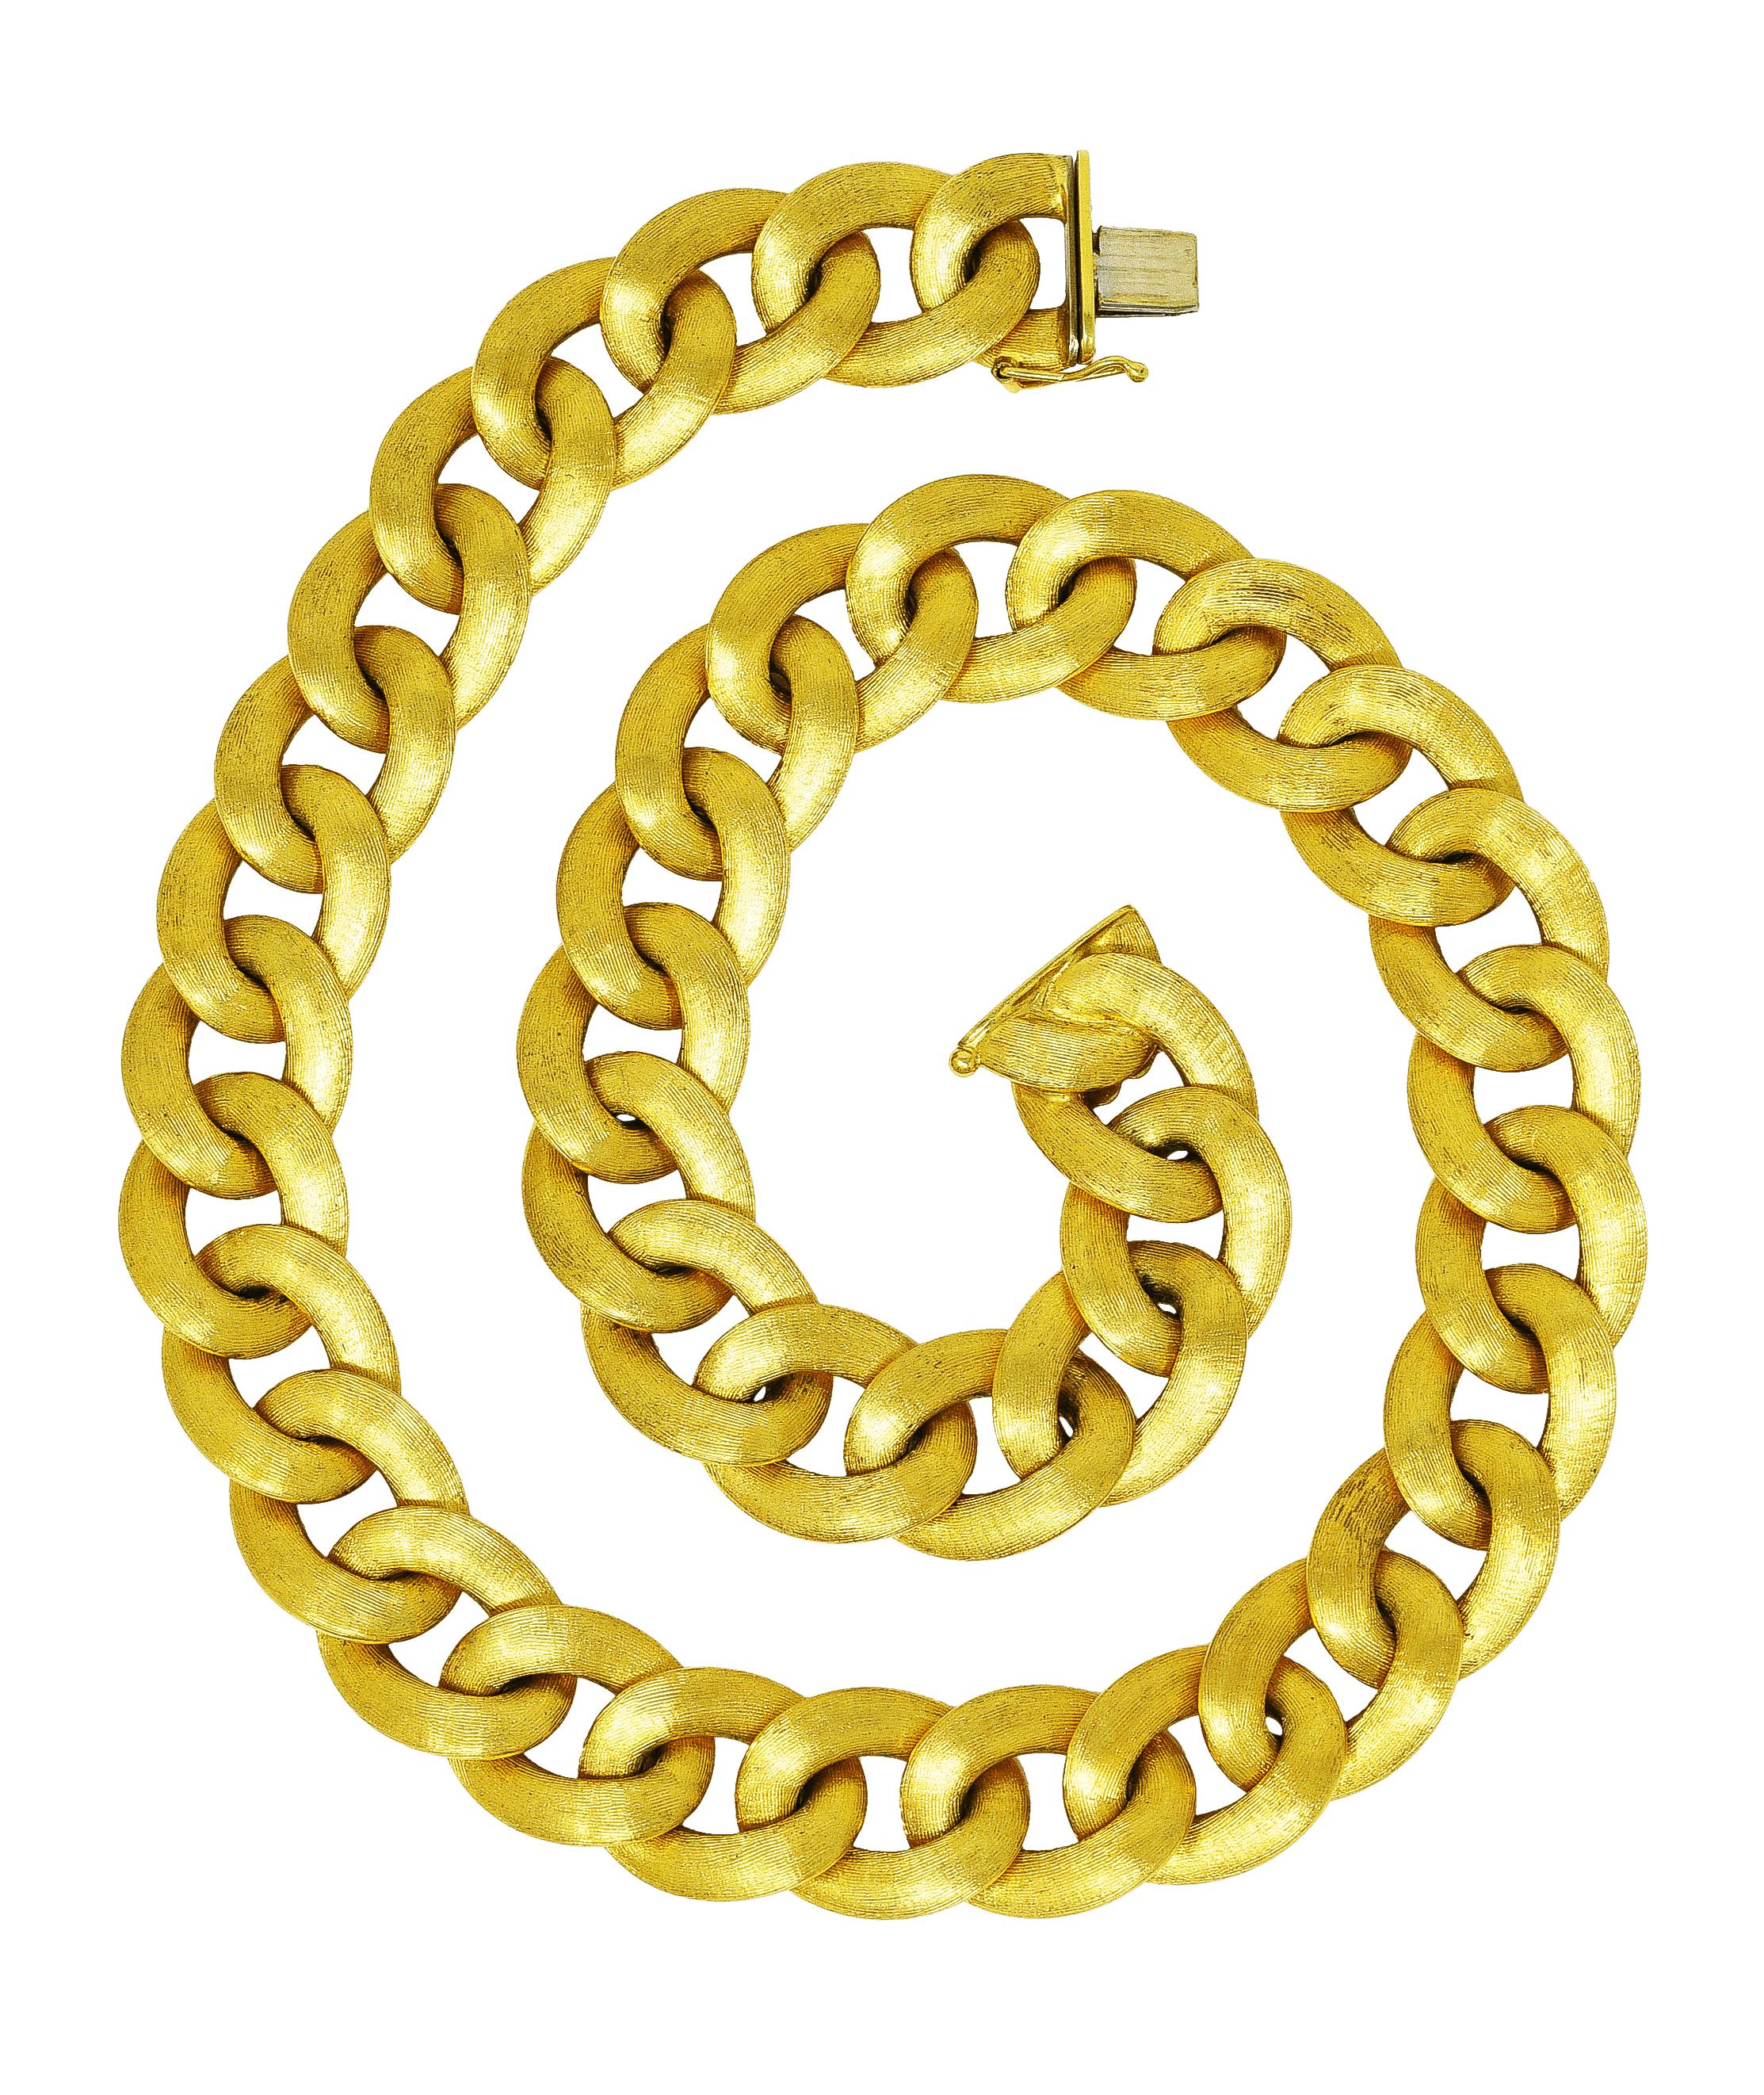 Necklace is comprised of large curb links. With brushed gold texture on one side. Completed by hidden clasp closure with figure eight safety. Stamped 750 with Italian assay marks for 18 karat gold. Circa: 1980's. Length: 18 inches. Width: 5/8 inch.